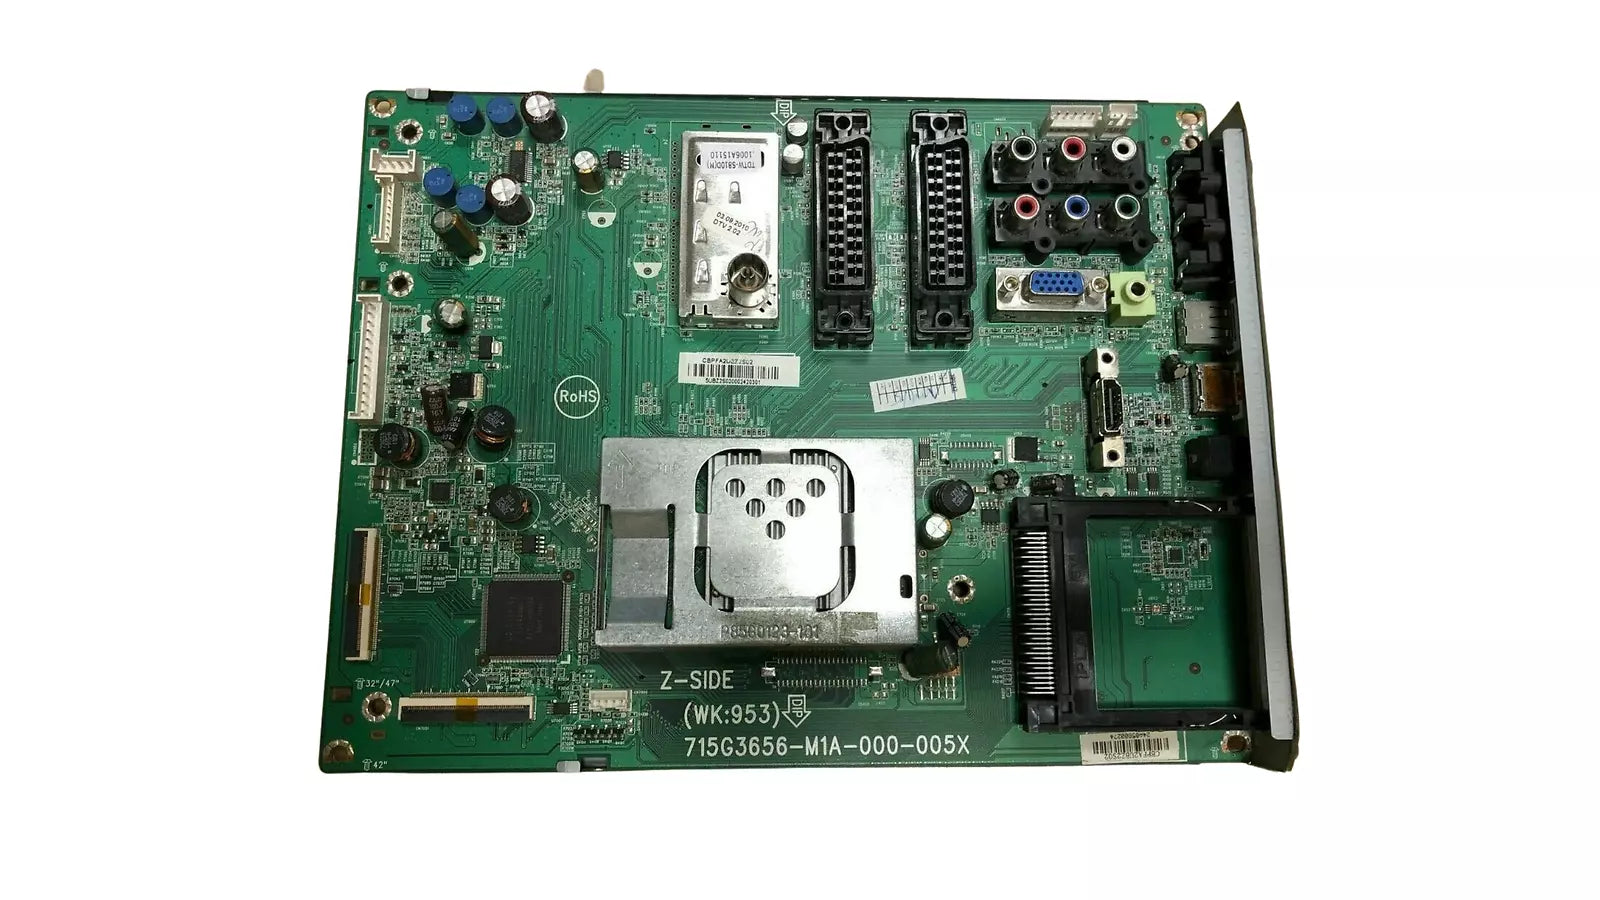 Philips 715G3656-M1A-000-005X Mainboard